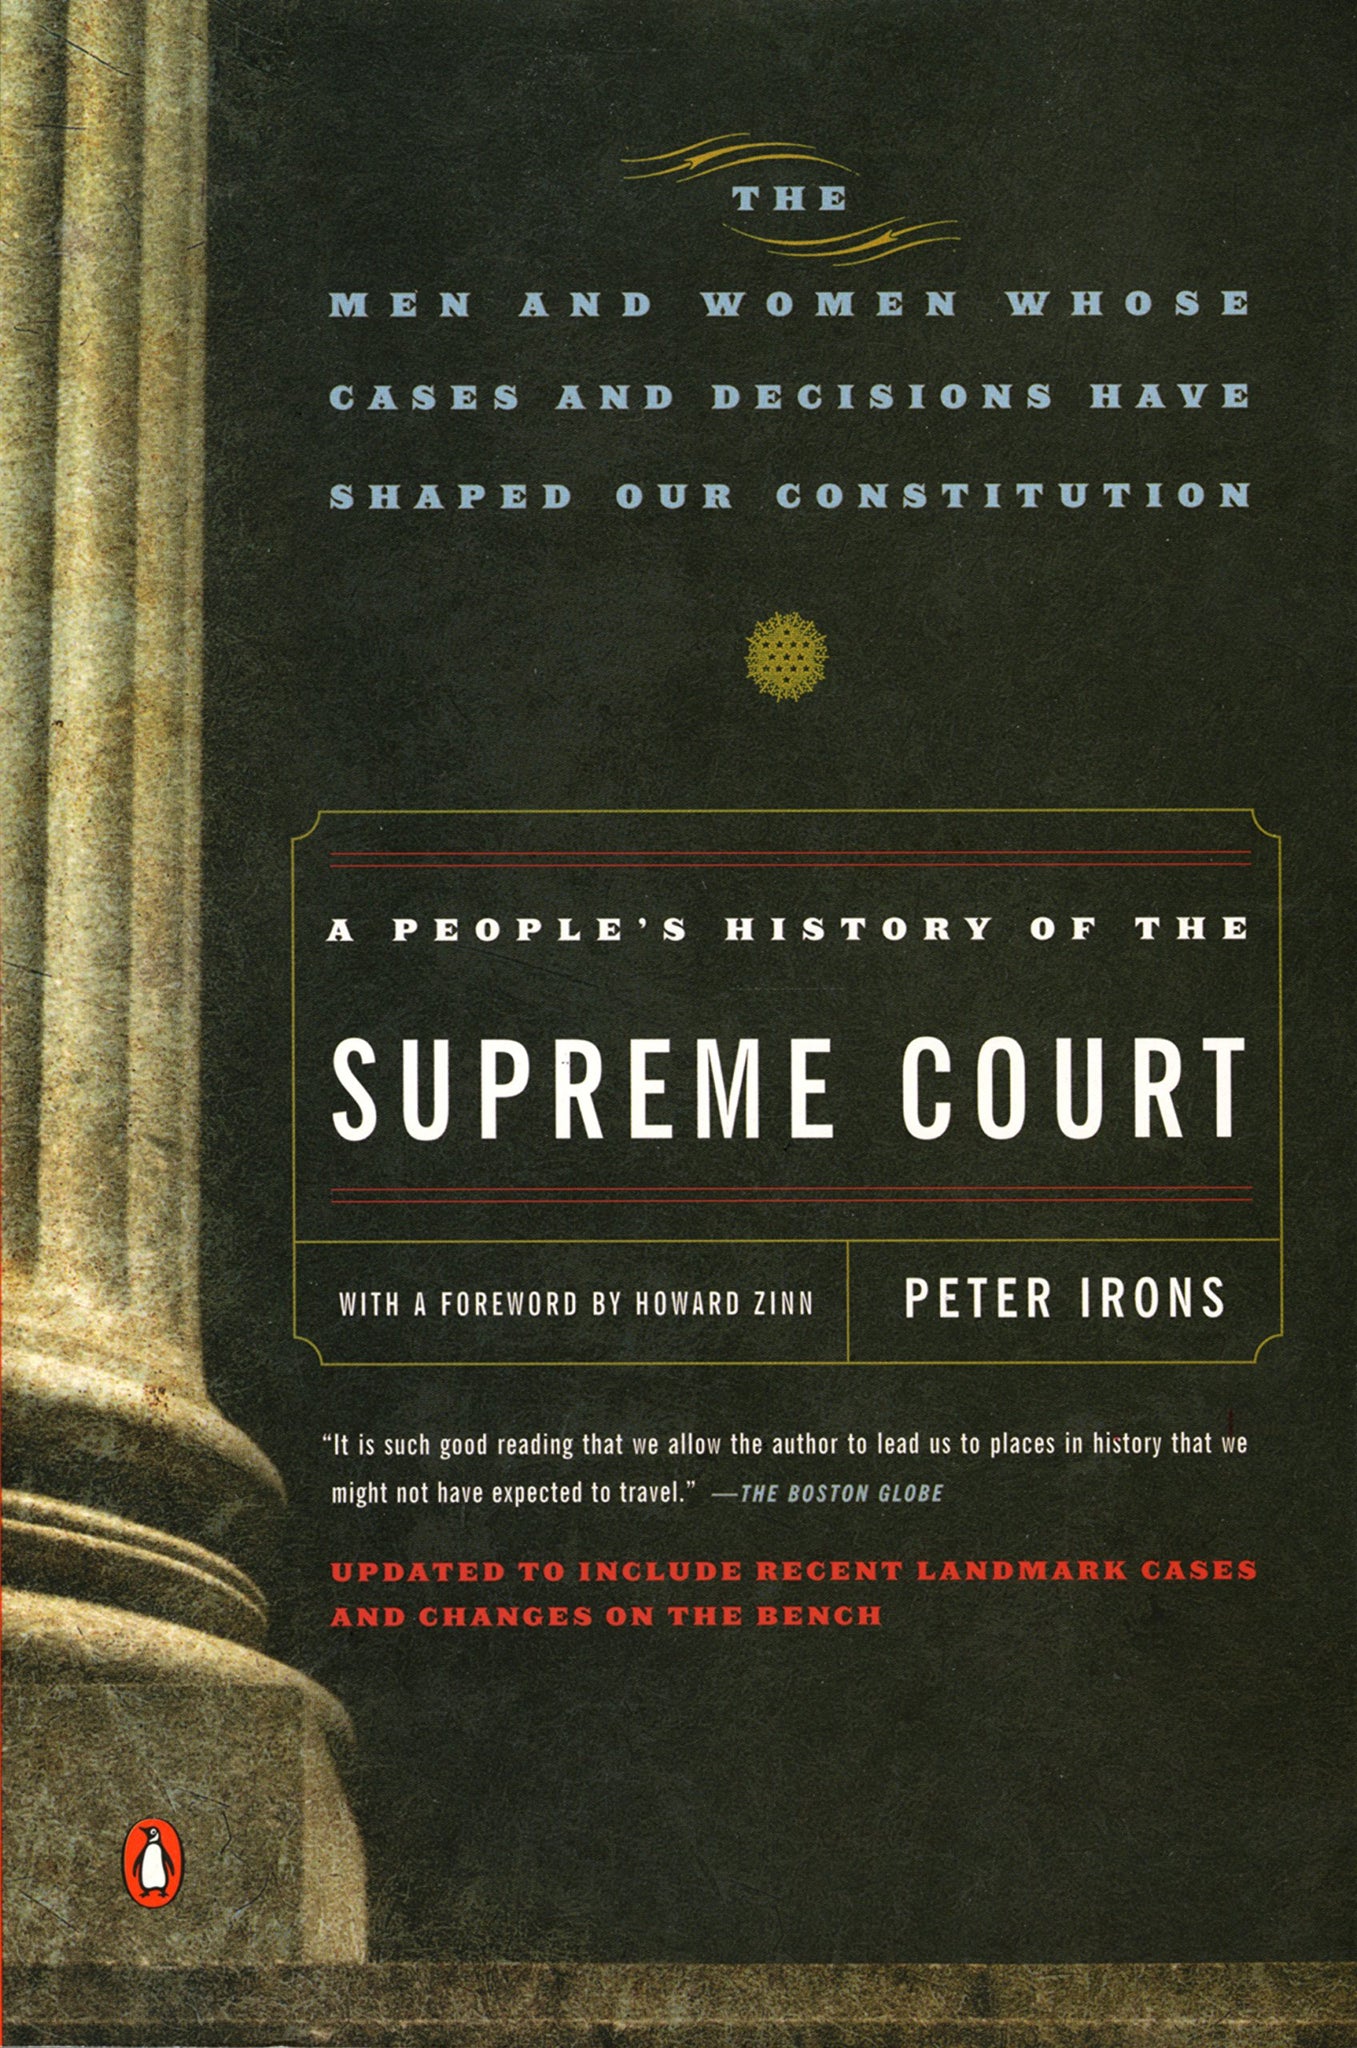 A People's History of the Supreme Court: The Men and Women Whose Cases and Decisions Have Shaped Our Constitution (Paperback)